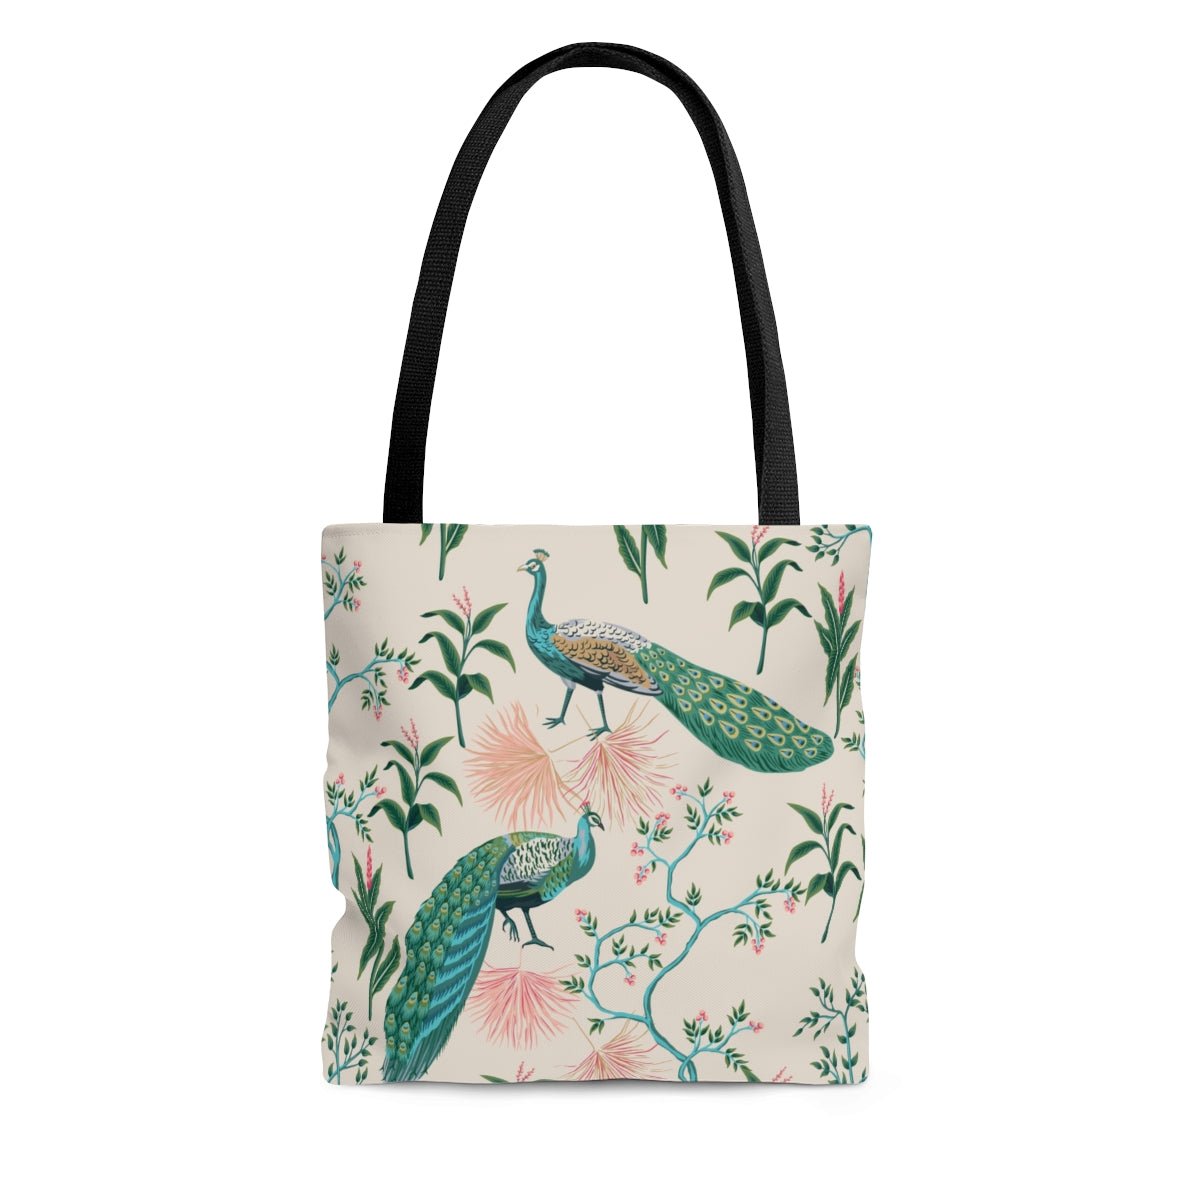 Chinoiserie Peacocks Tote Bag - Puffin Lime